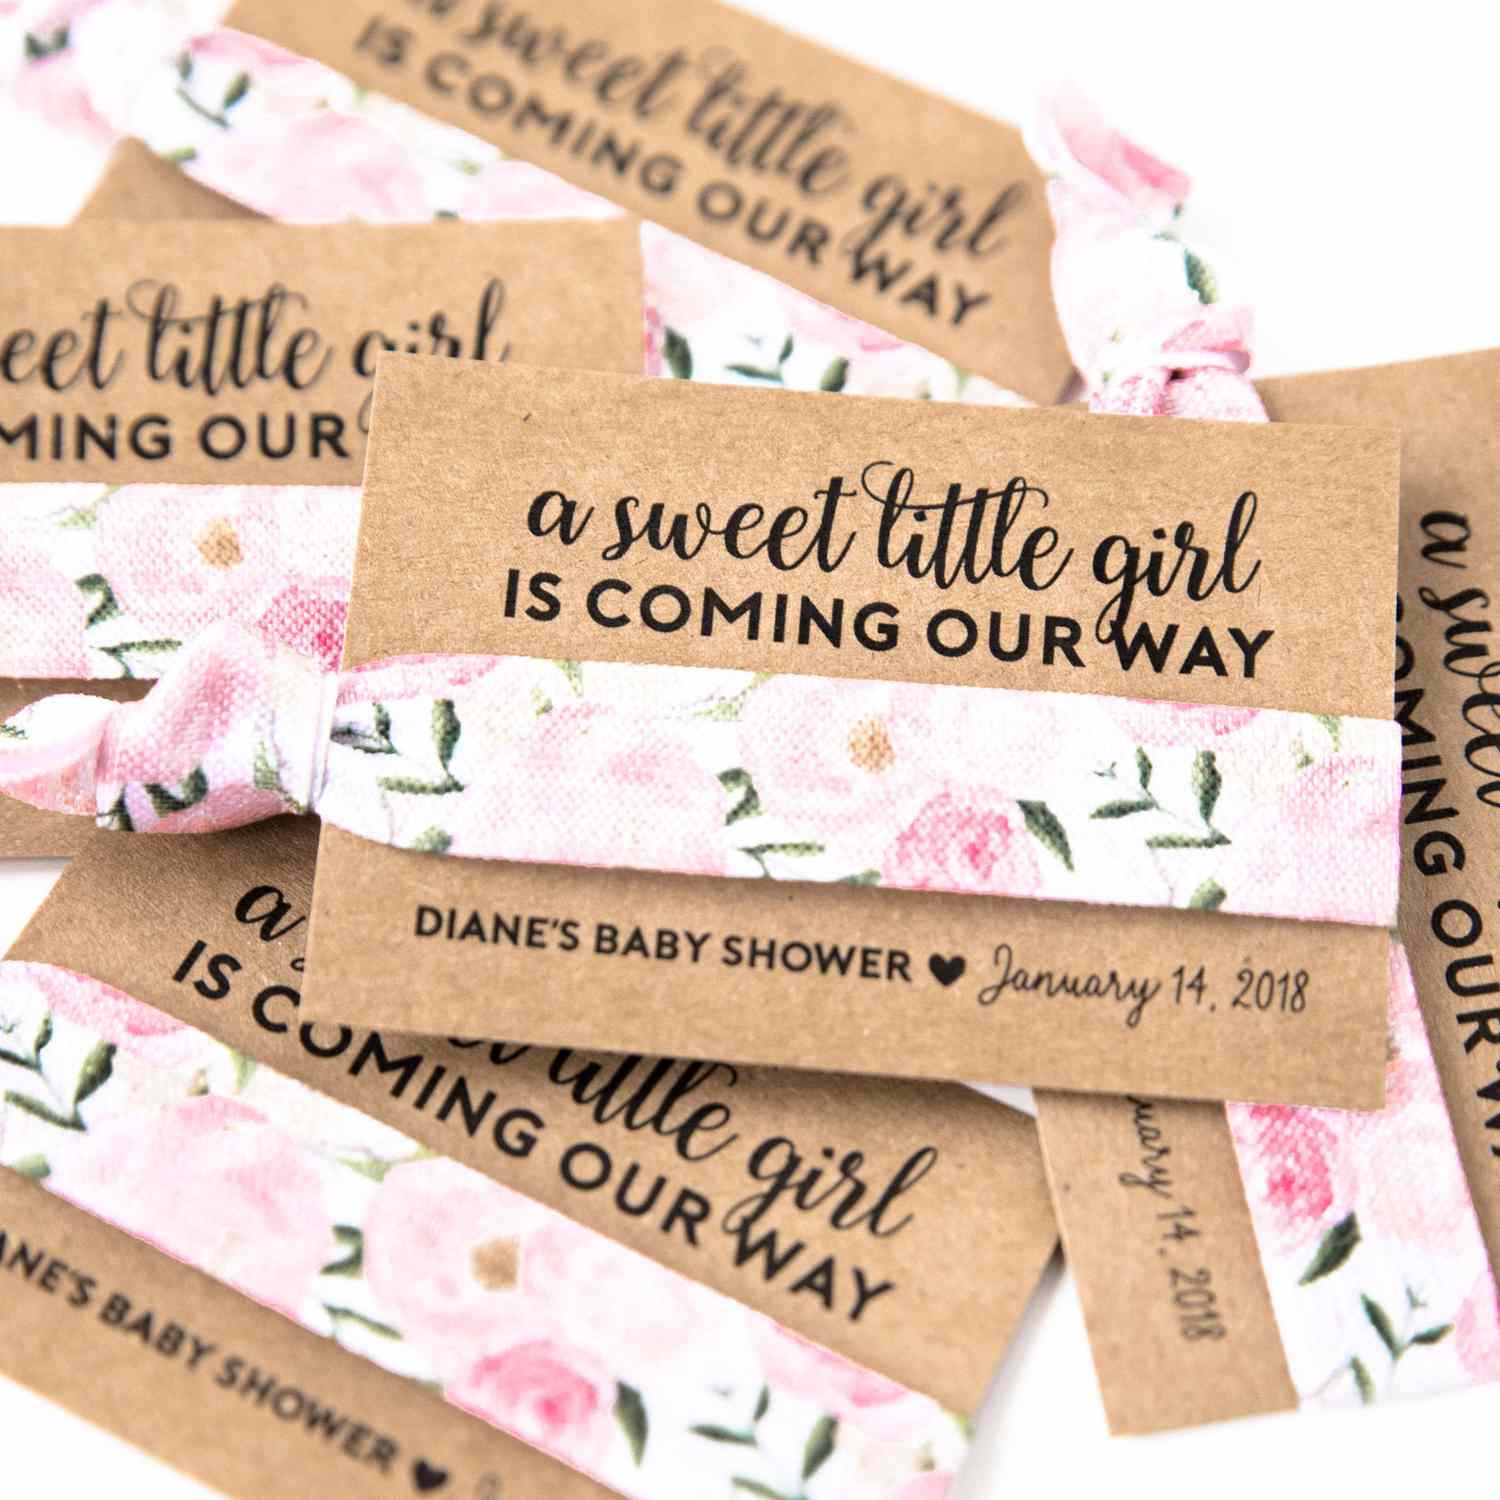 Printed A Baby is Brewing Tags Baby Shower Tea Party Favor Tags Tea Party Baby Shower Favor Tags